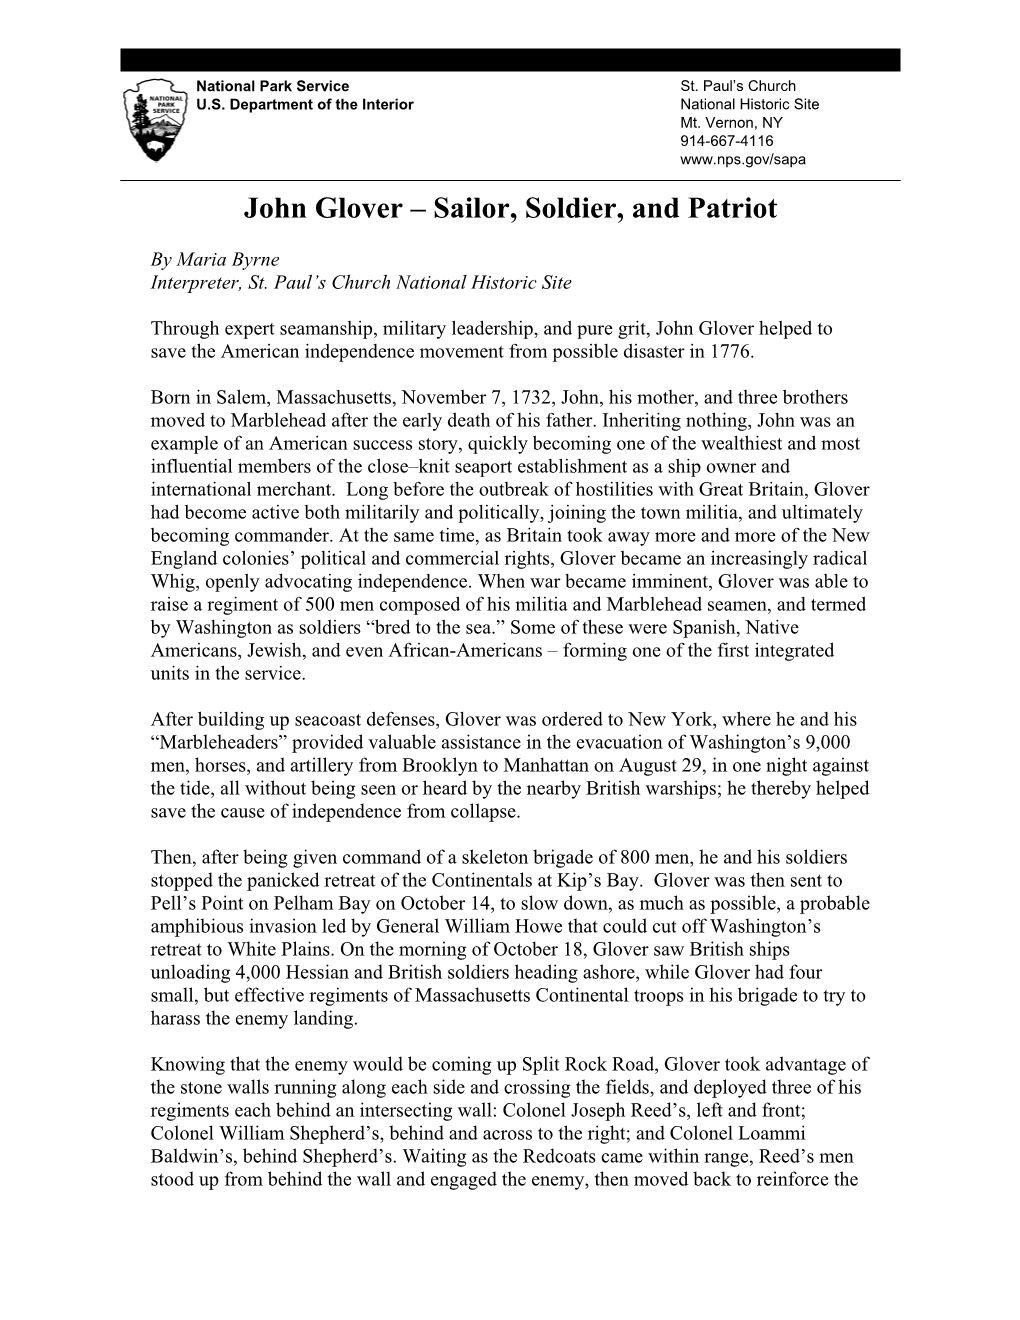 John Glover – Sailor, Soldier, and Patriot